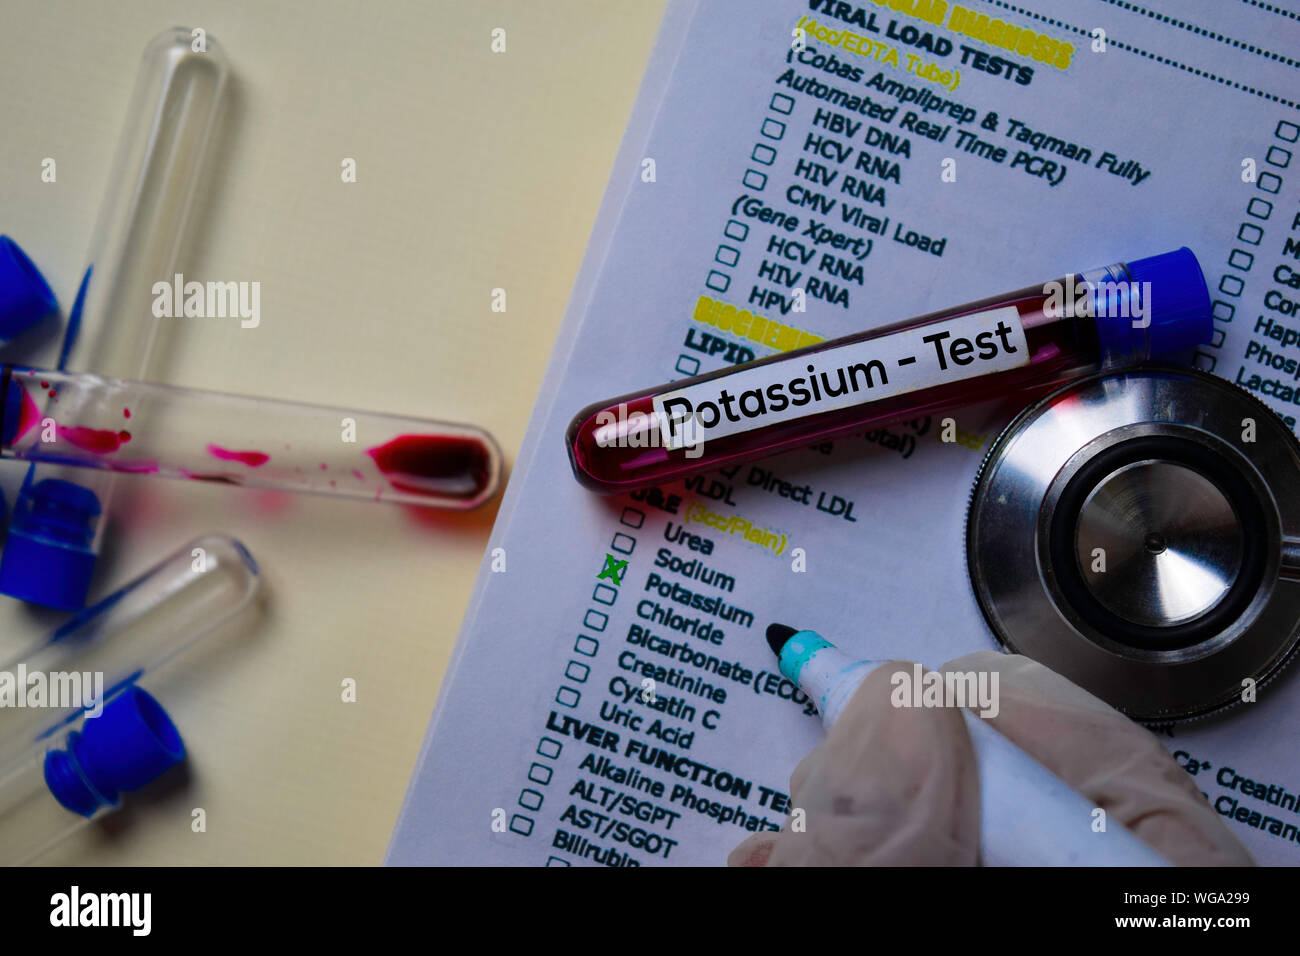 Potassium - Test with blood sample. Top view isolated on office desk.  Healthcare/Medical concept Stock Photo - Alamy